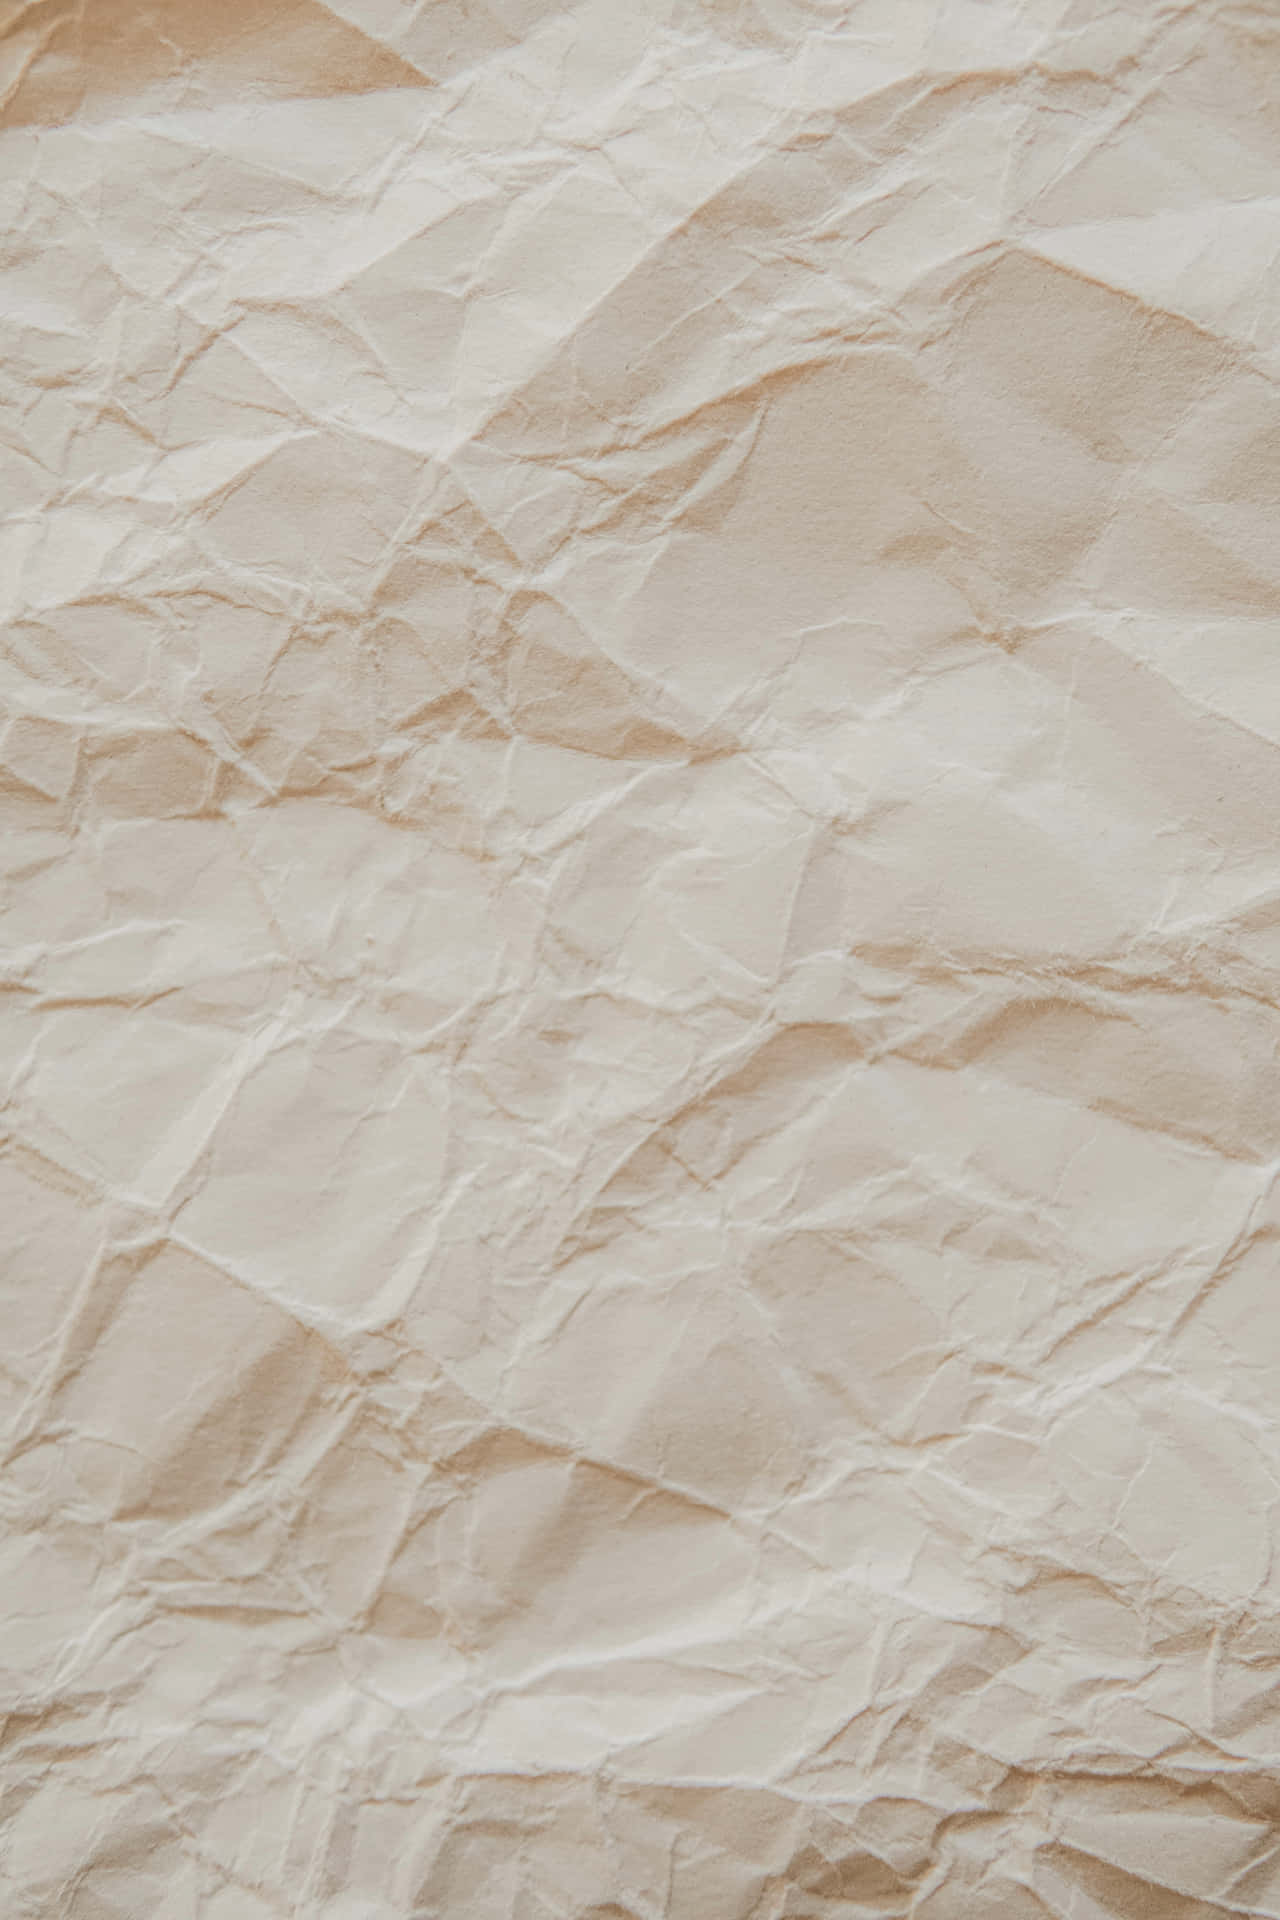 Paper Old And Crumpled Wallpaper